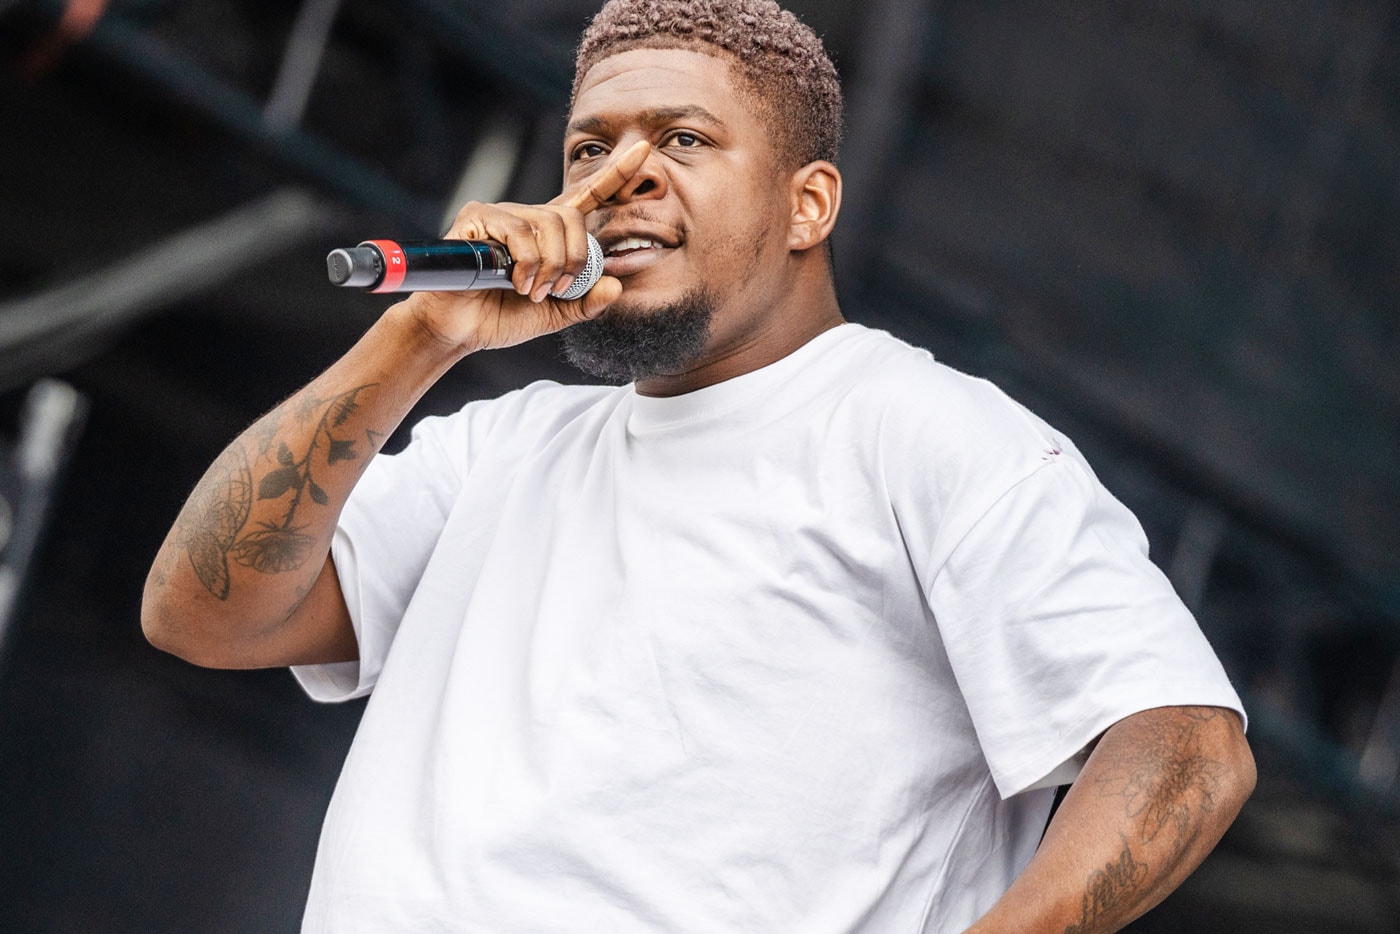 Mick Jenkins, The Man Behind The Music